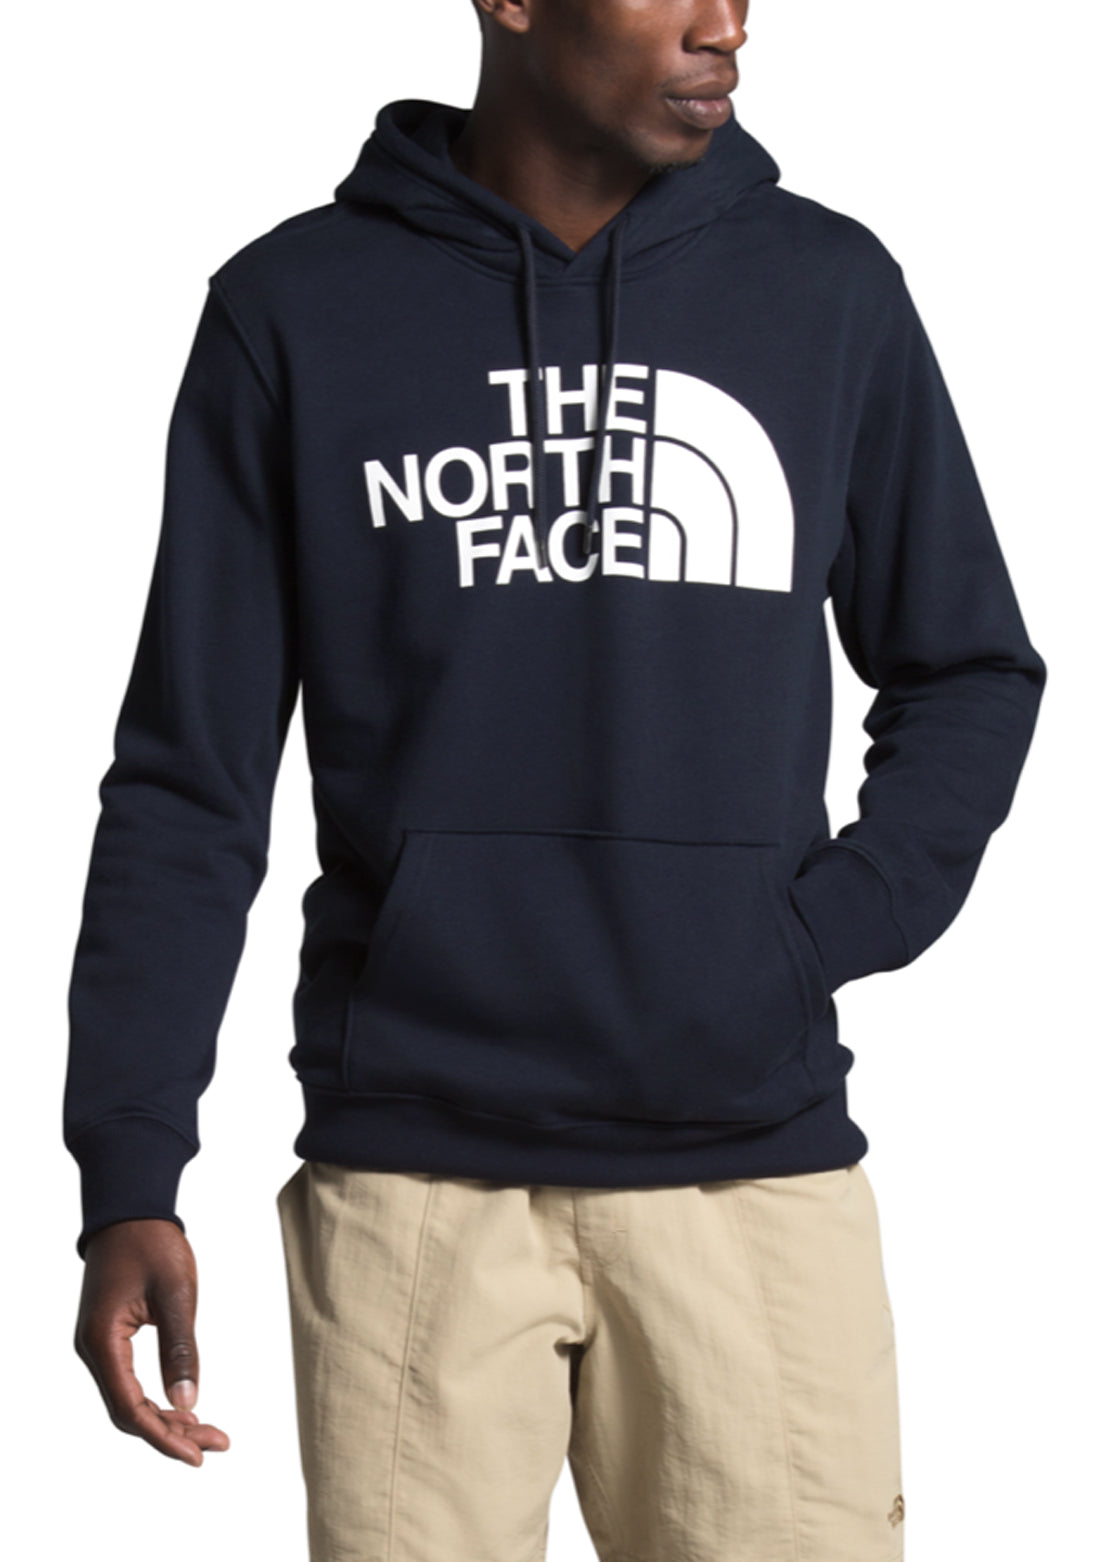 The North Face Men's Half Dome Pullover Hoodie - PRFO Sports